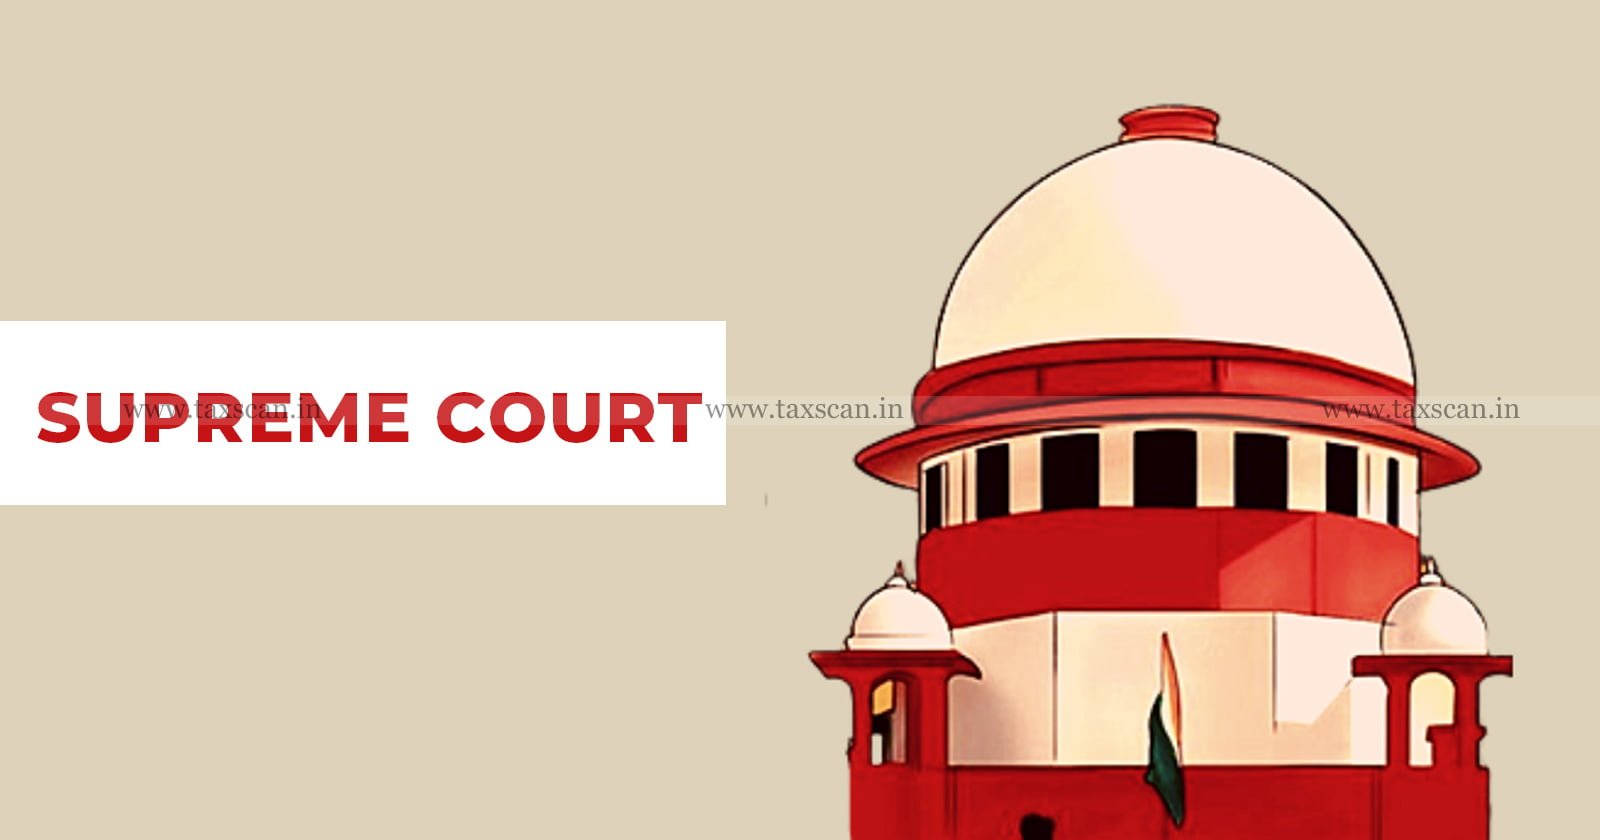 Supreme Court - Tax Disputes - Electricity Generation - Electricity - Supreme Court redirects Tax Disputes on Electricity Generation - State High Courts - Union of India - Resolutions - taxscan